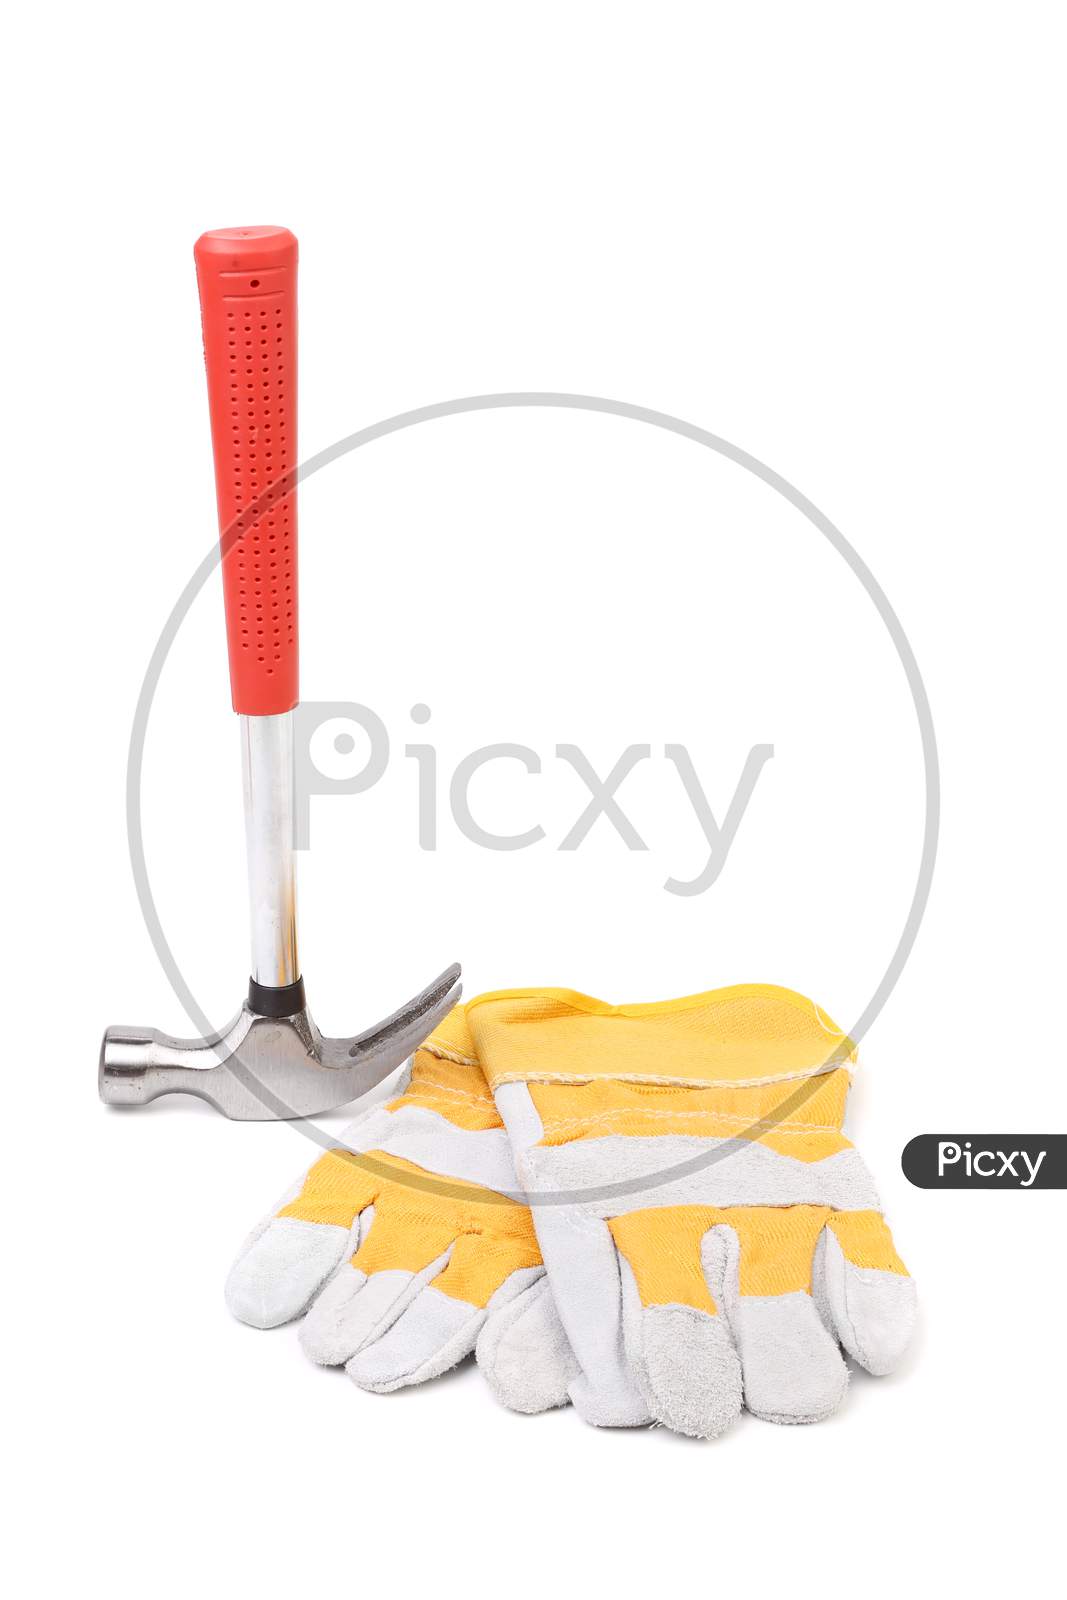 Construction Gloves And Hammer. Isolated On A White Background.